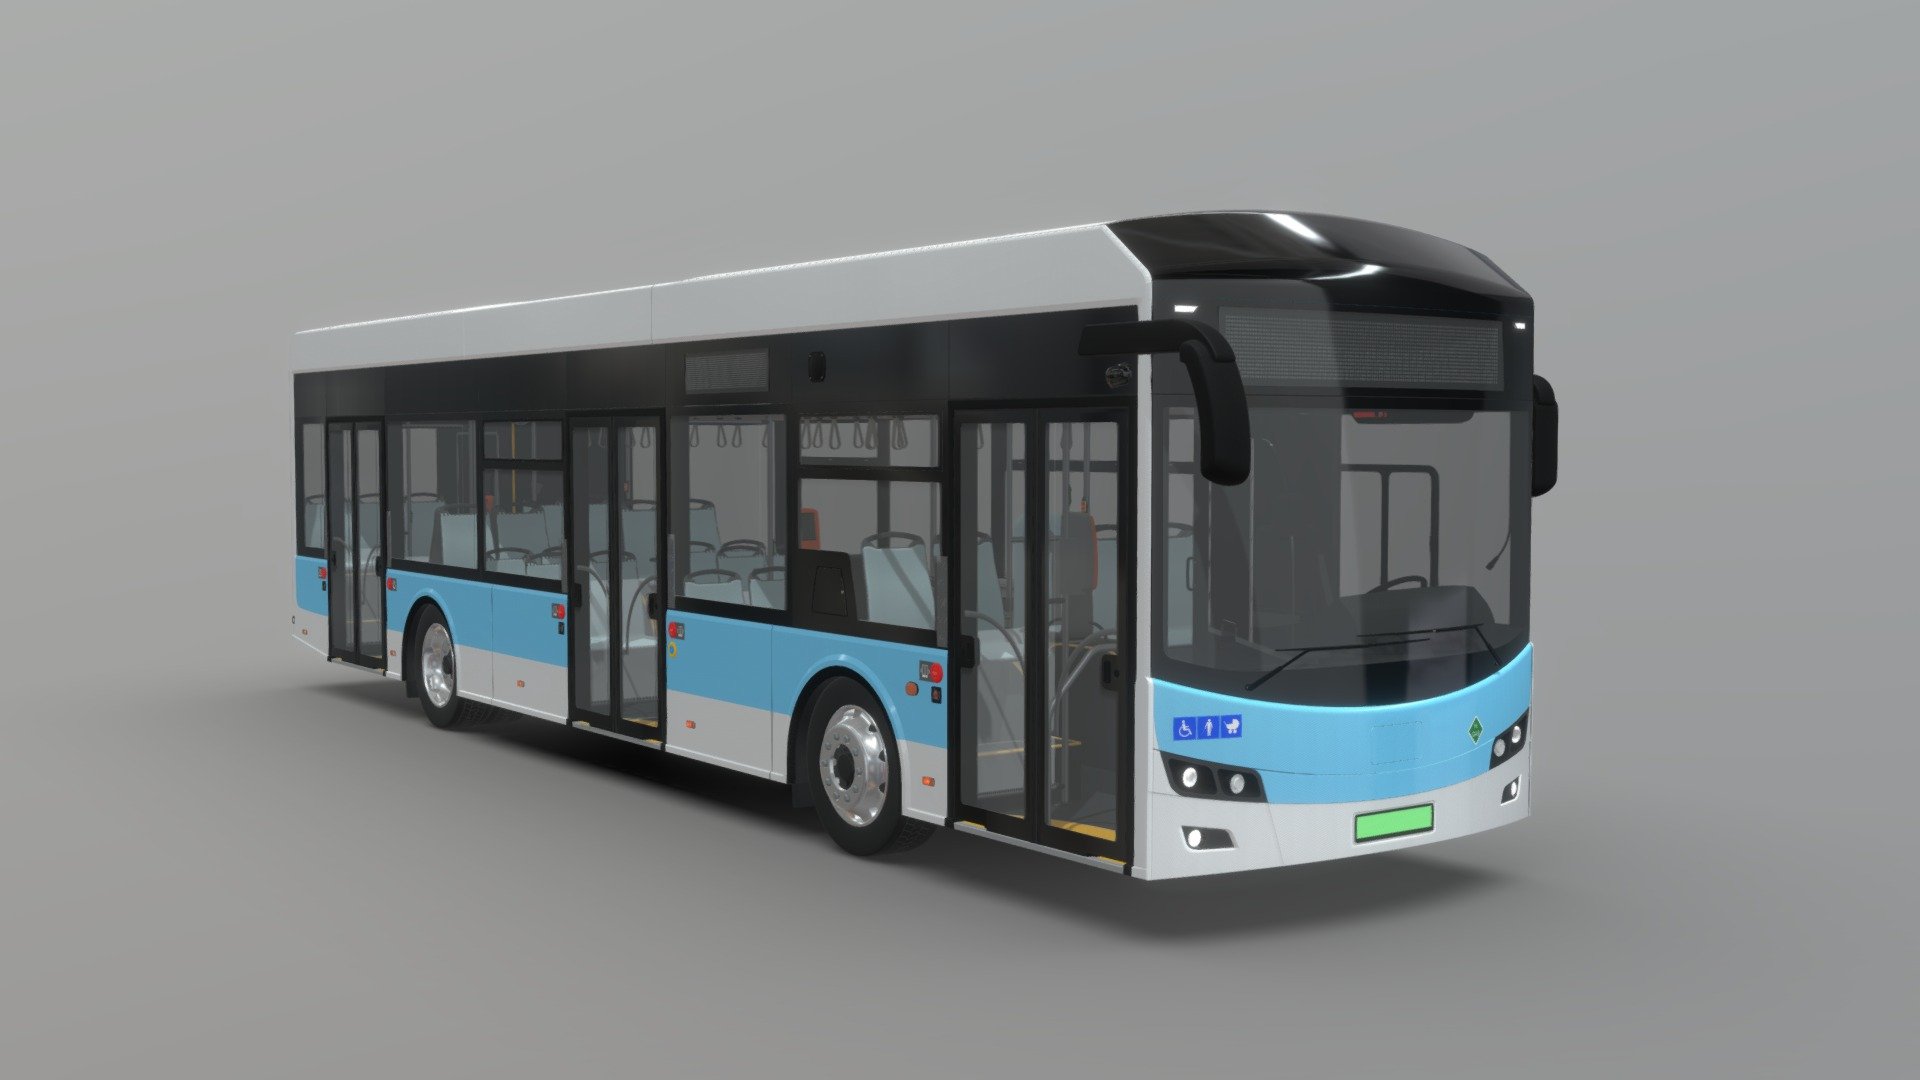 Modern fully low-floor city bus powered by a fuel cell that acts as a miniature hydrogen power plant.
Bus has undergone a slight design facelift, compared to my previous bus models.

[Updated model 23.02.2023] - Hydrogen Fuel Cell City Bus [Full Interior] - Buy Royalty Free 3D model by KolorowyAnanas 3d model